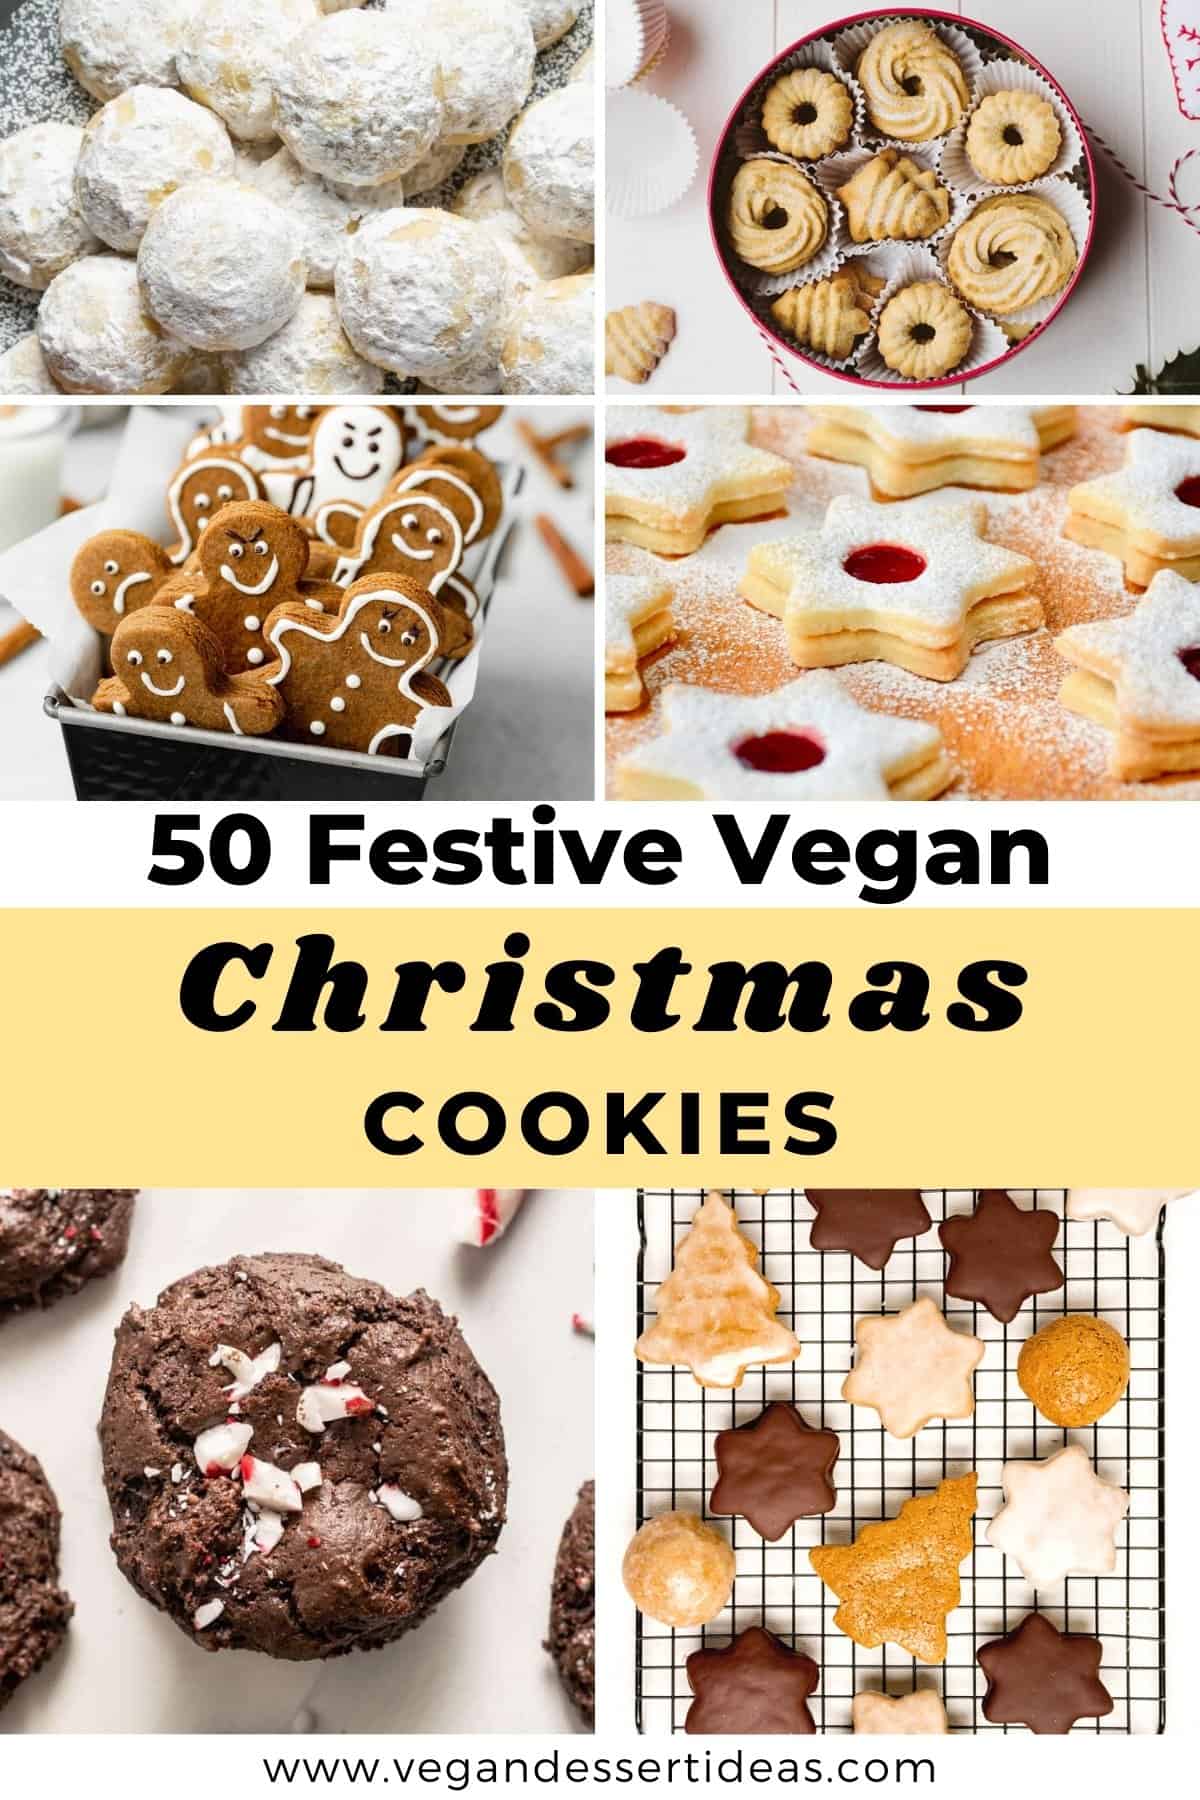 A collage of different types of cookies "50 Festive Vegan Christmas Cookies".